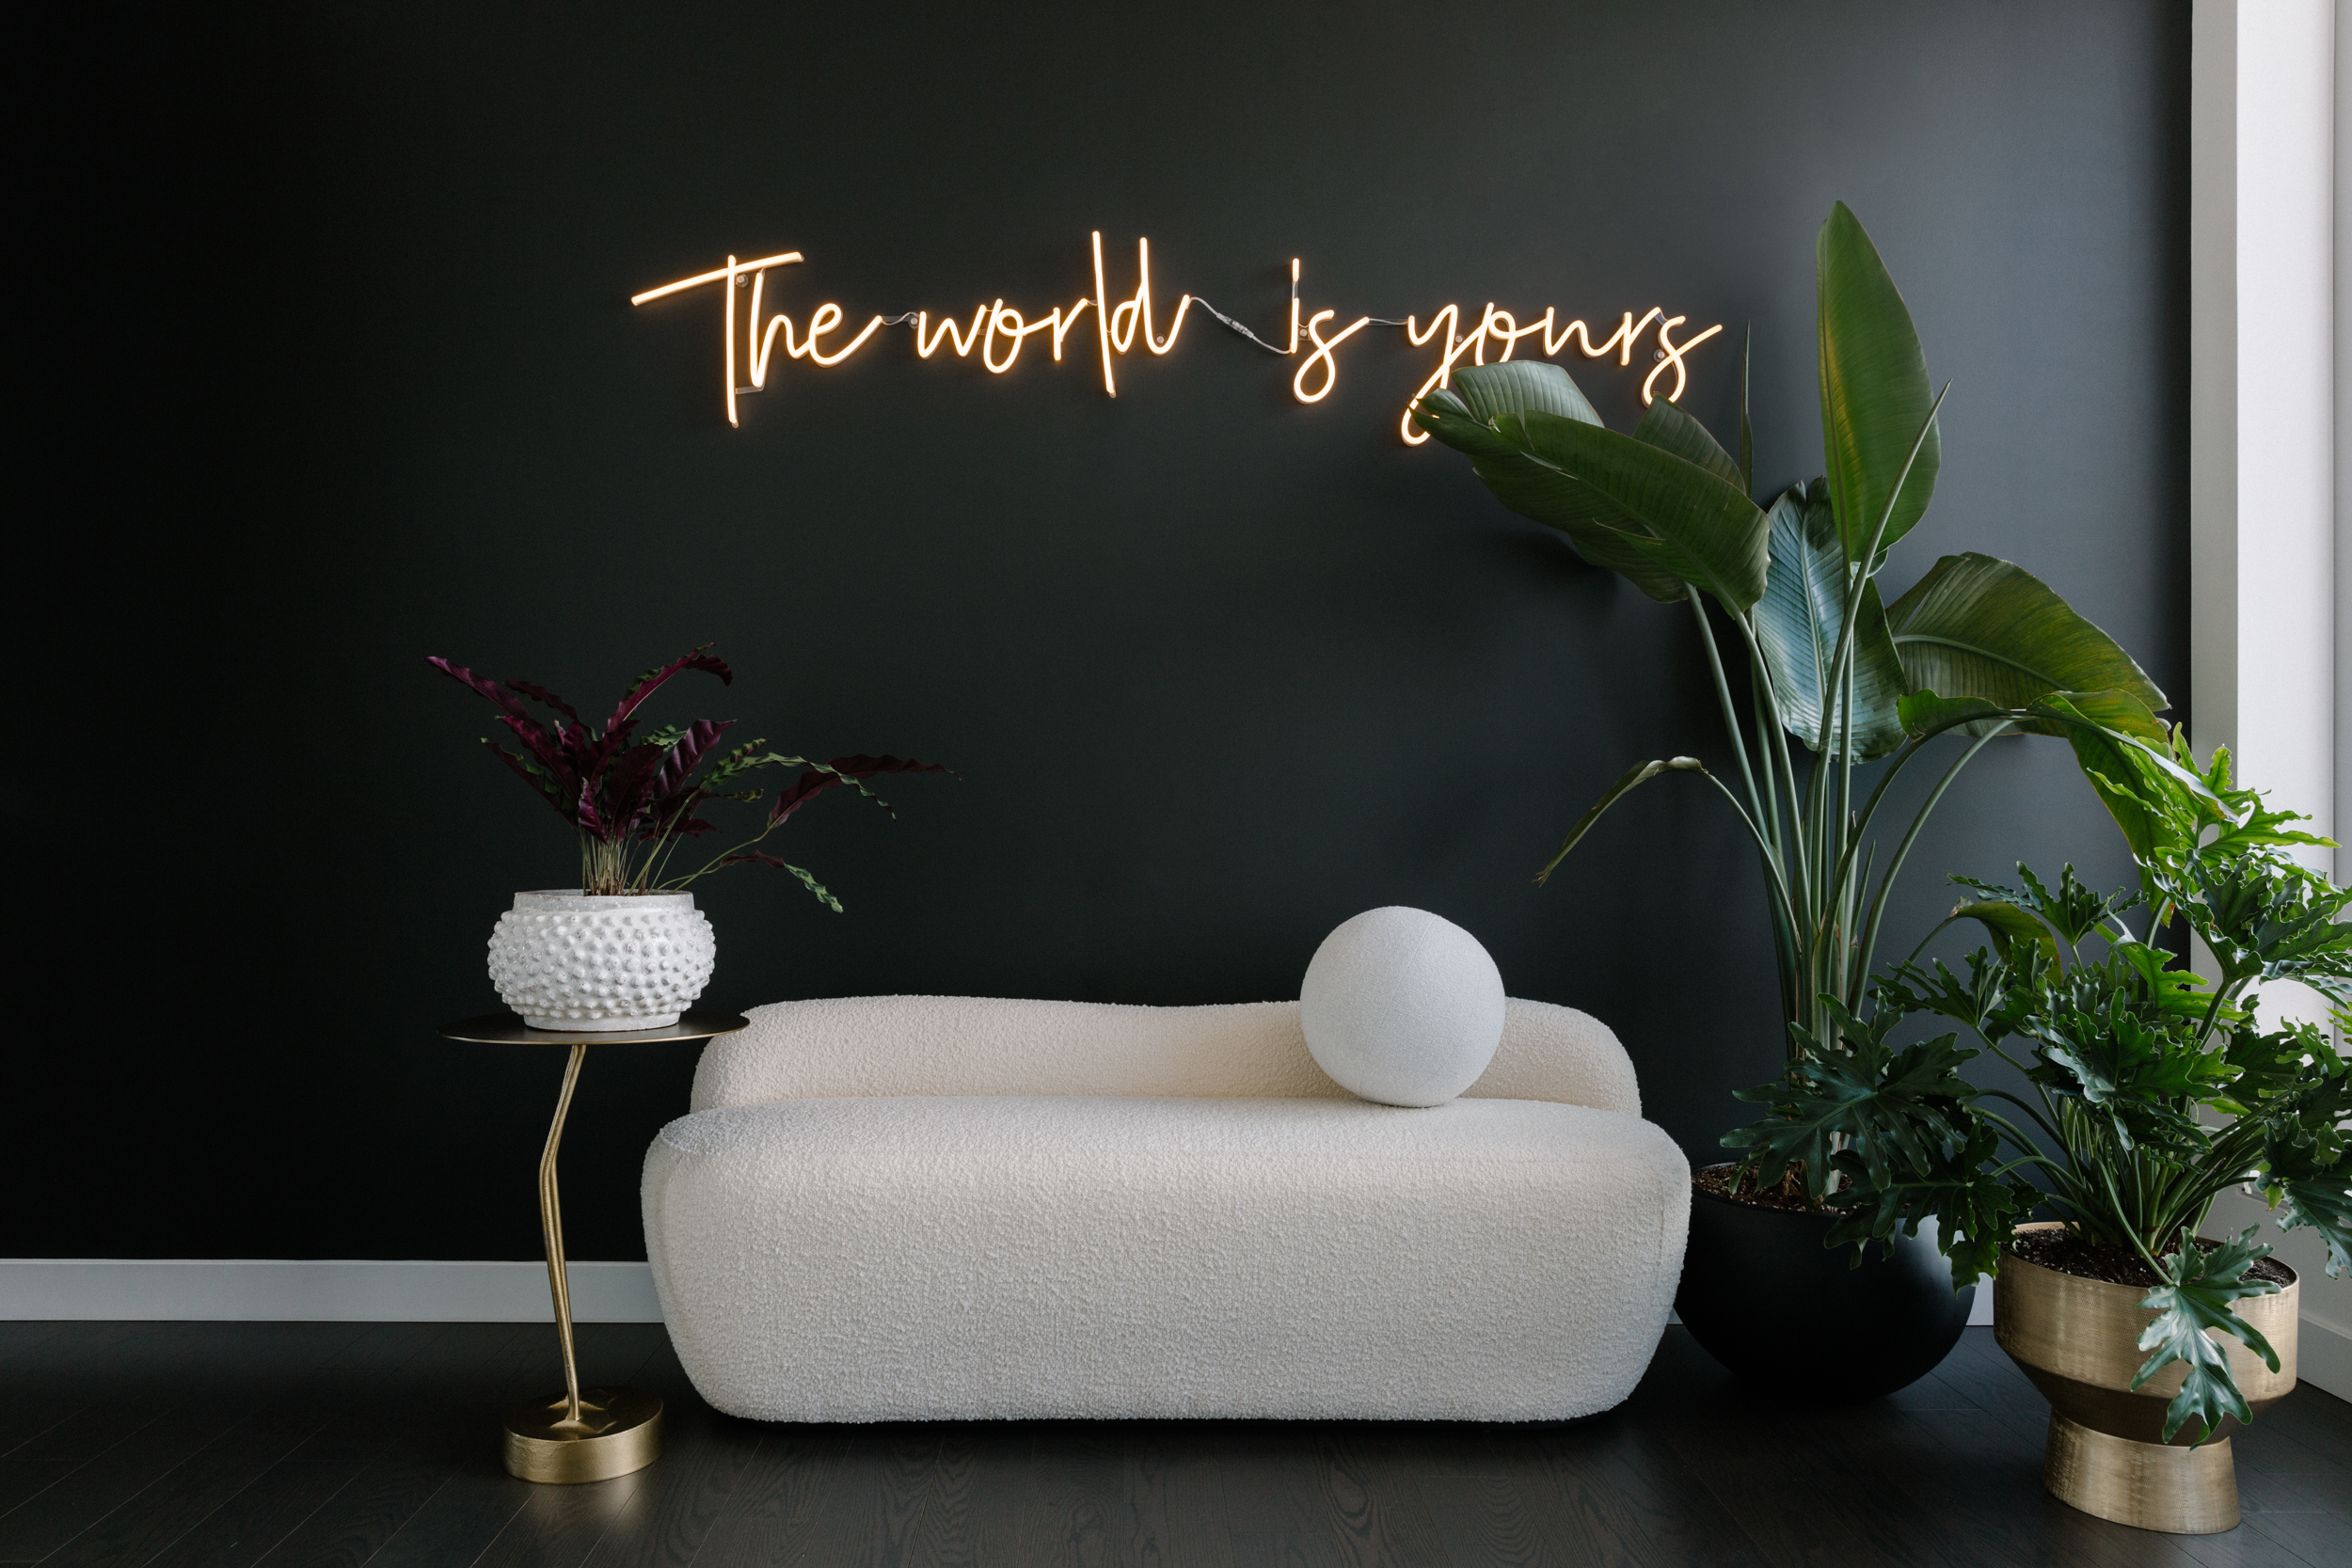 White loveseat and plants against black wall with neon sign